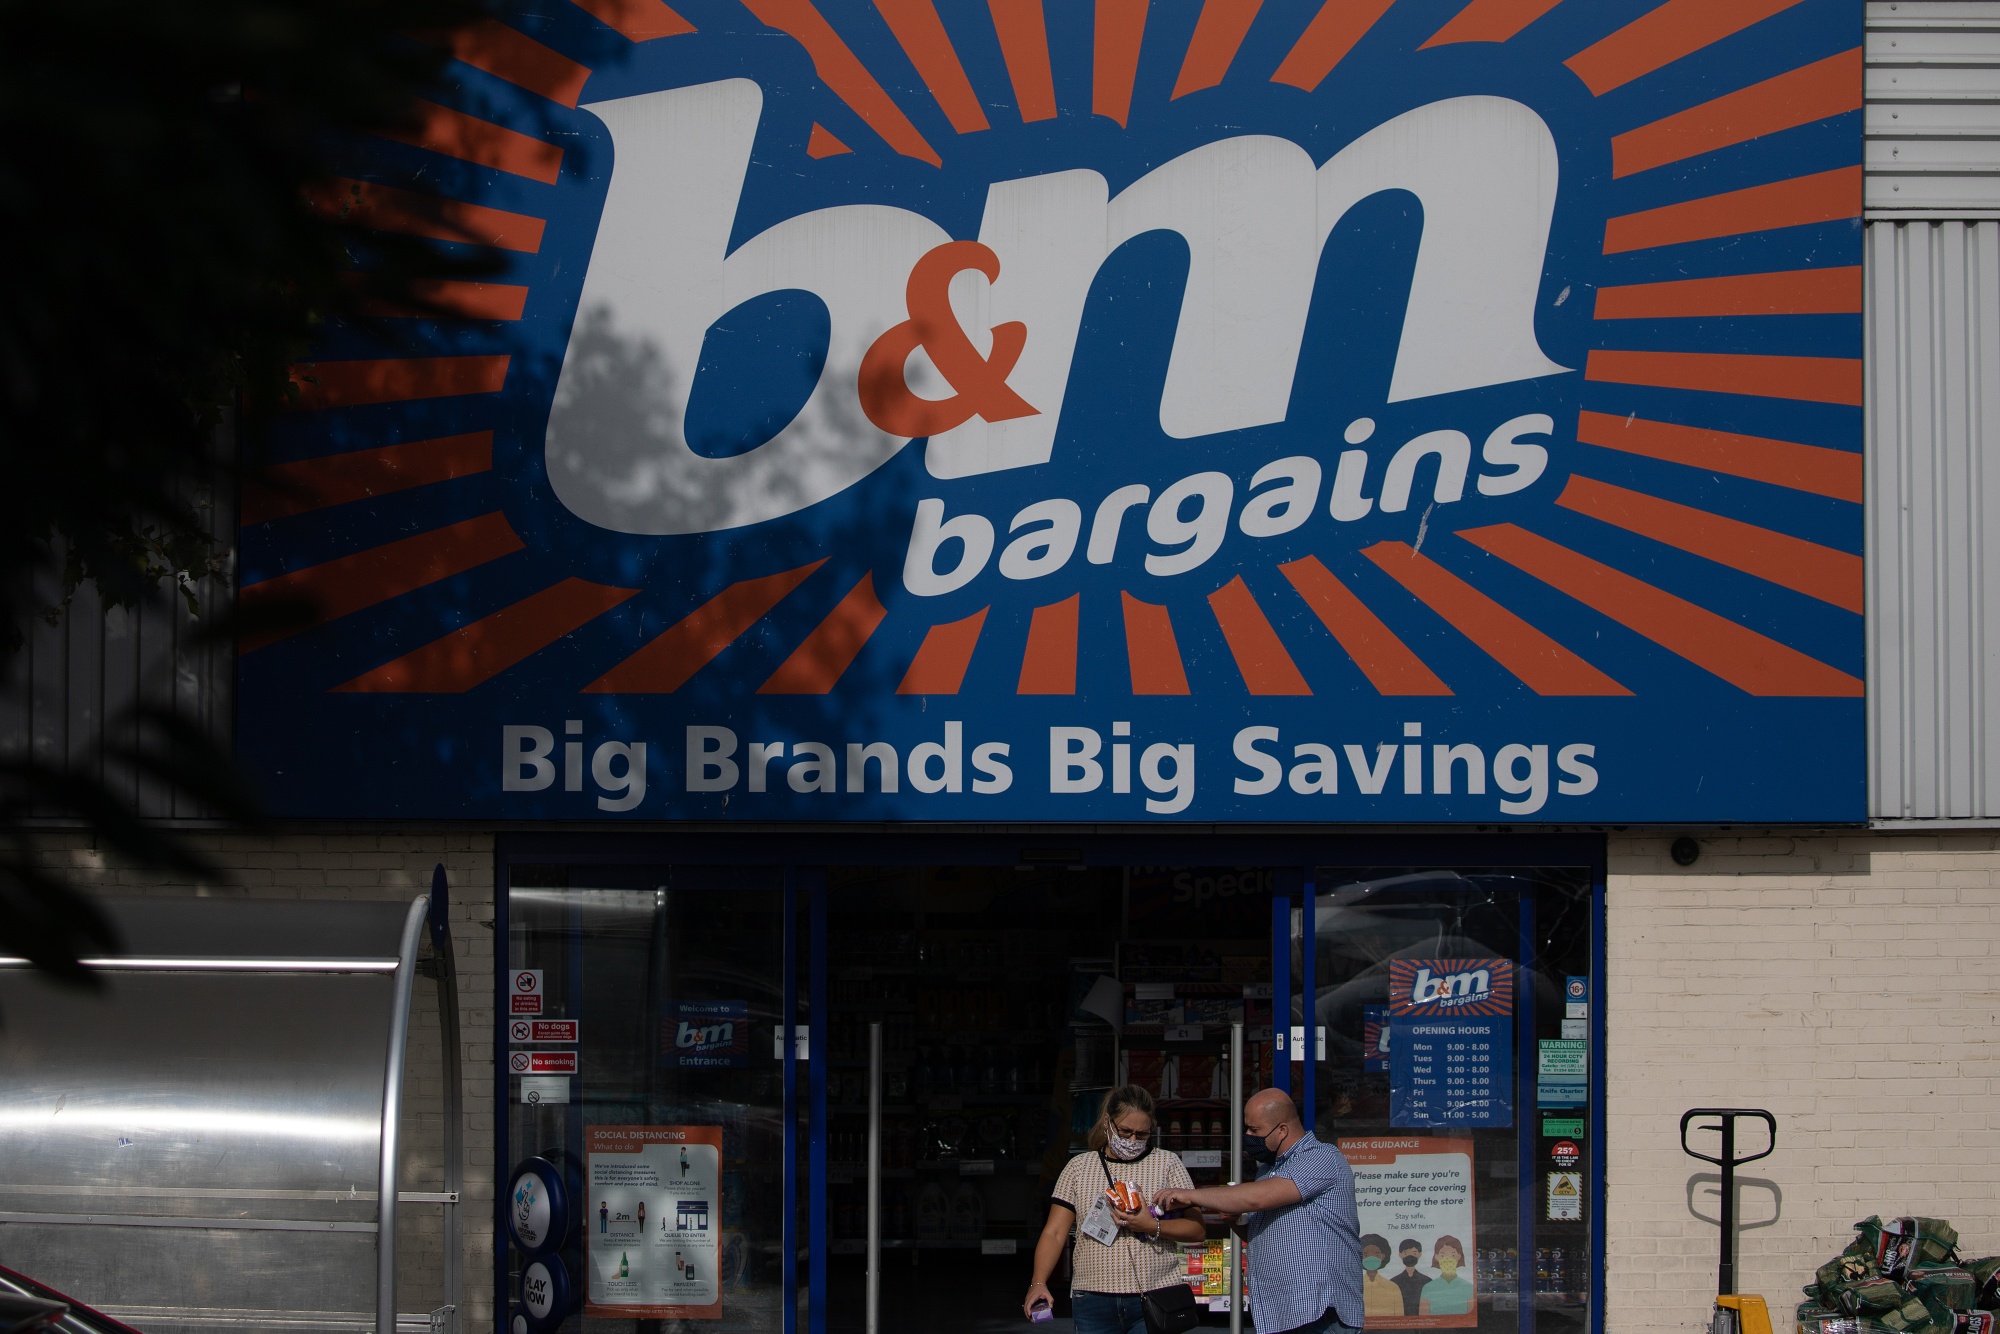 B&amp;M Bargains in the U.K. has seen sales soar during the coronavirus pandemic, even though it doesn’t have an e-commerce business.